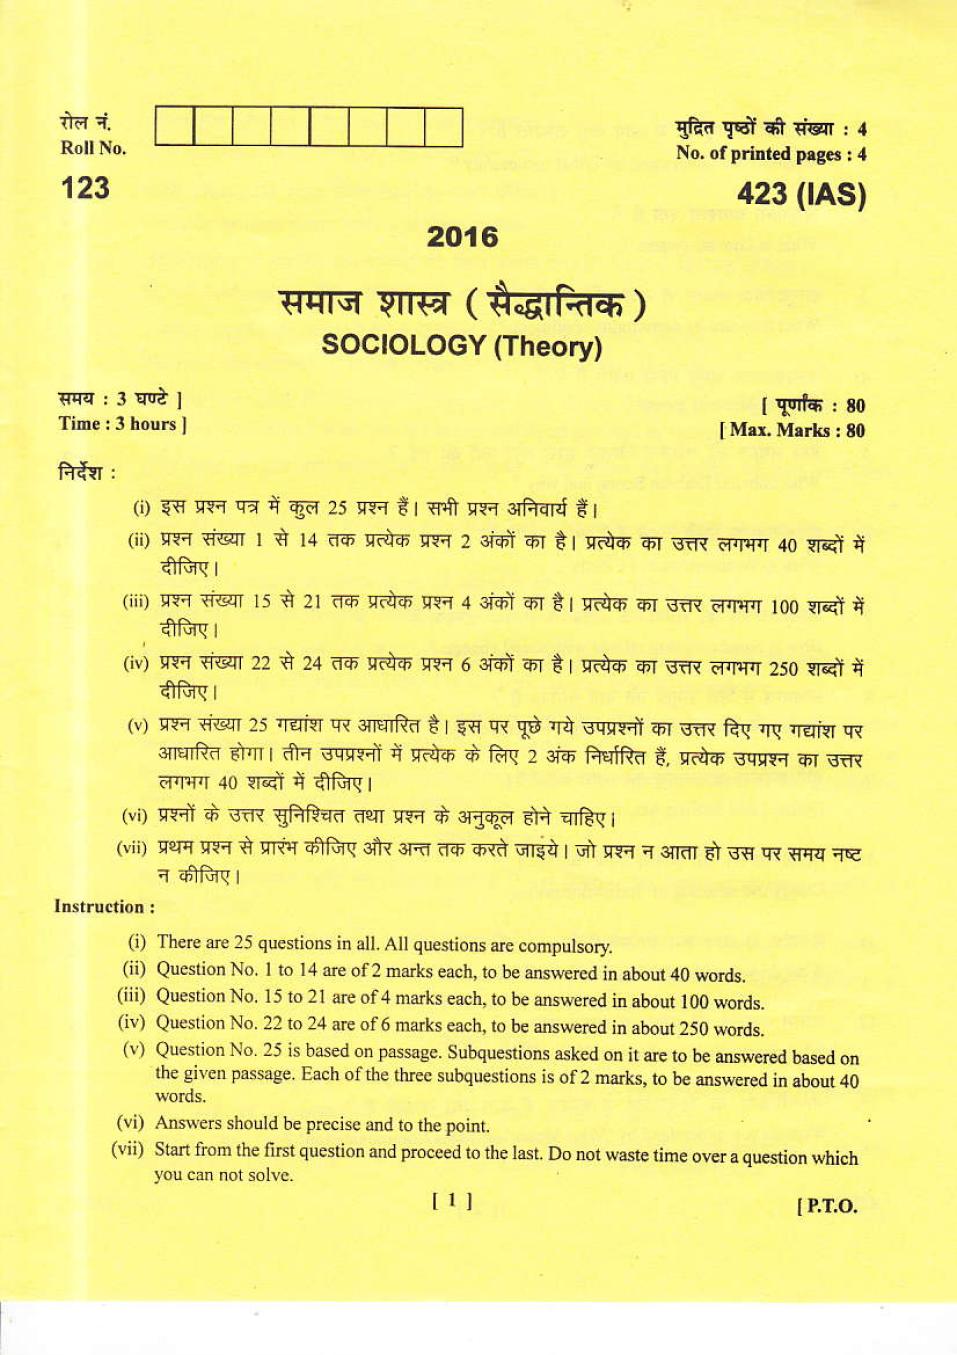 Uttarakhand Board Class 12 Question Paper 2016 for Sociology - Page 1